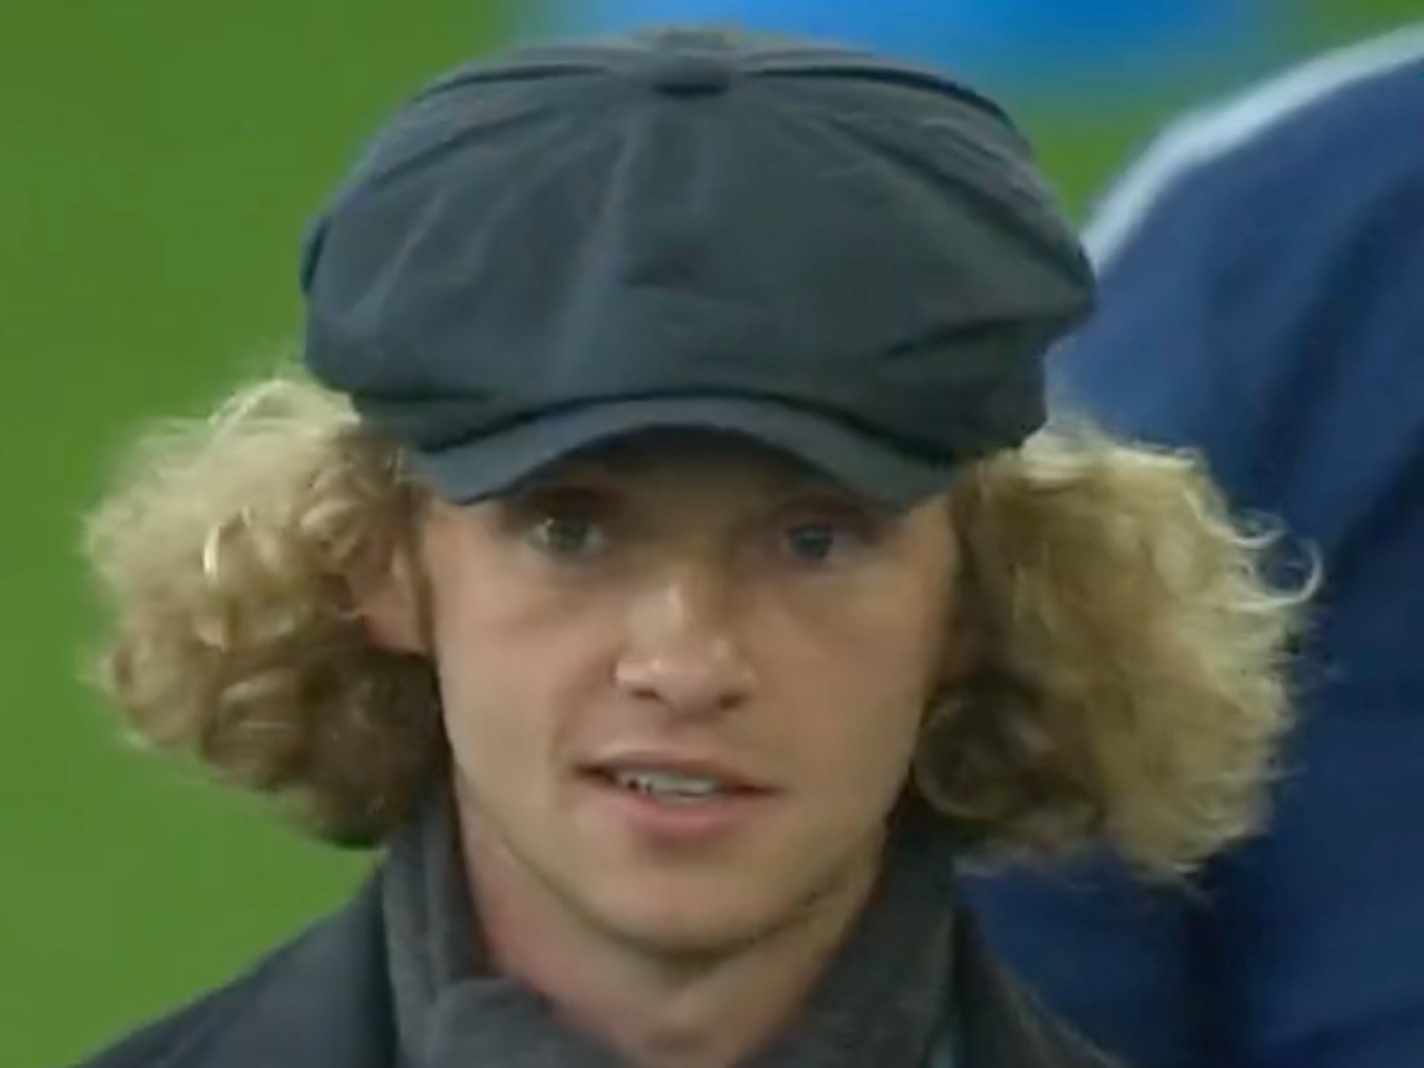 Tom-Davies-was-present-during-match-against-Leicester.jpg